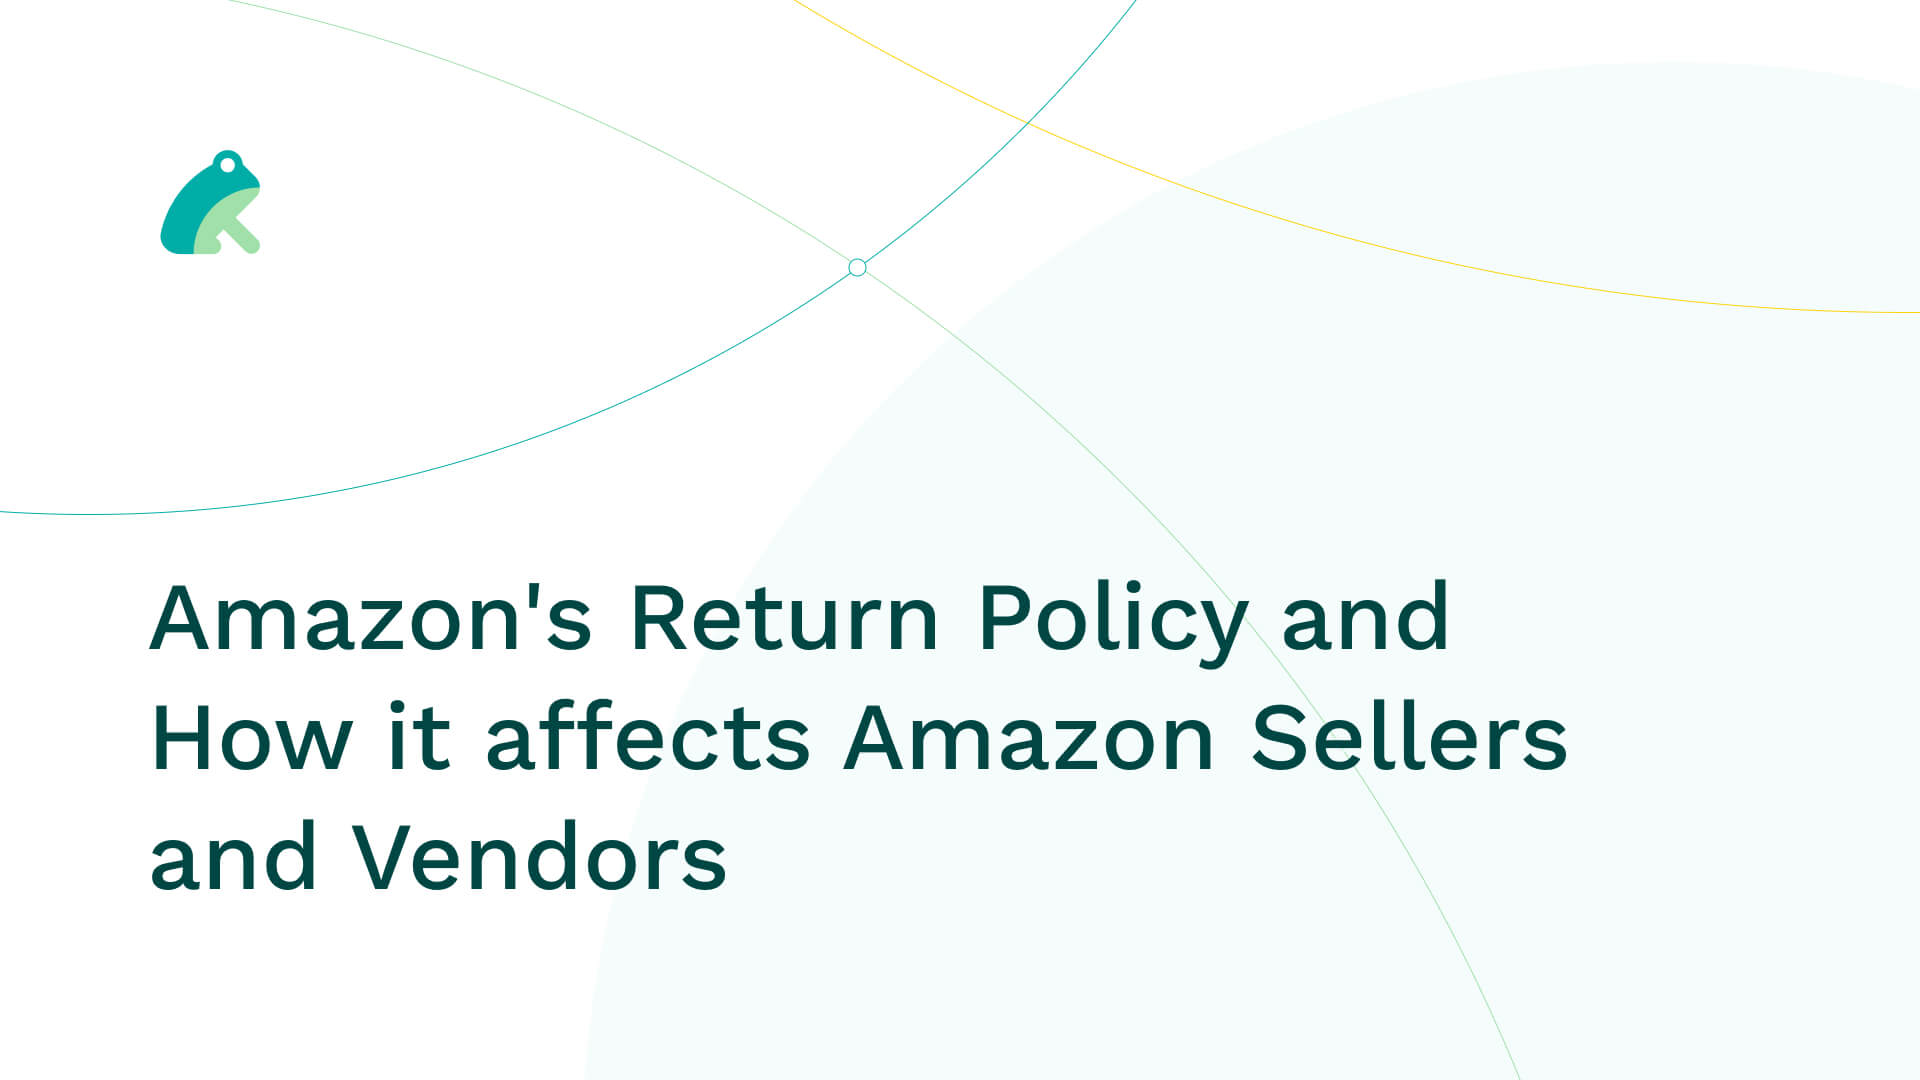 Amazon's Return Policy and How it affects Amazon Sellers and Vendors